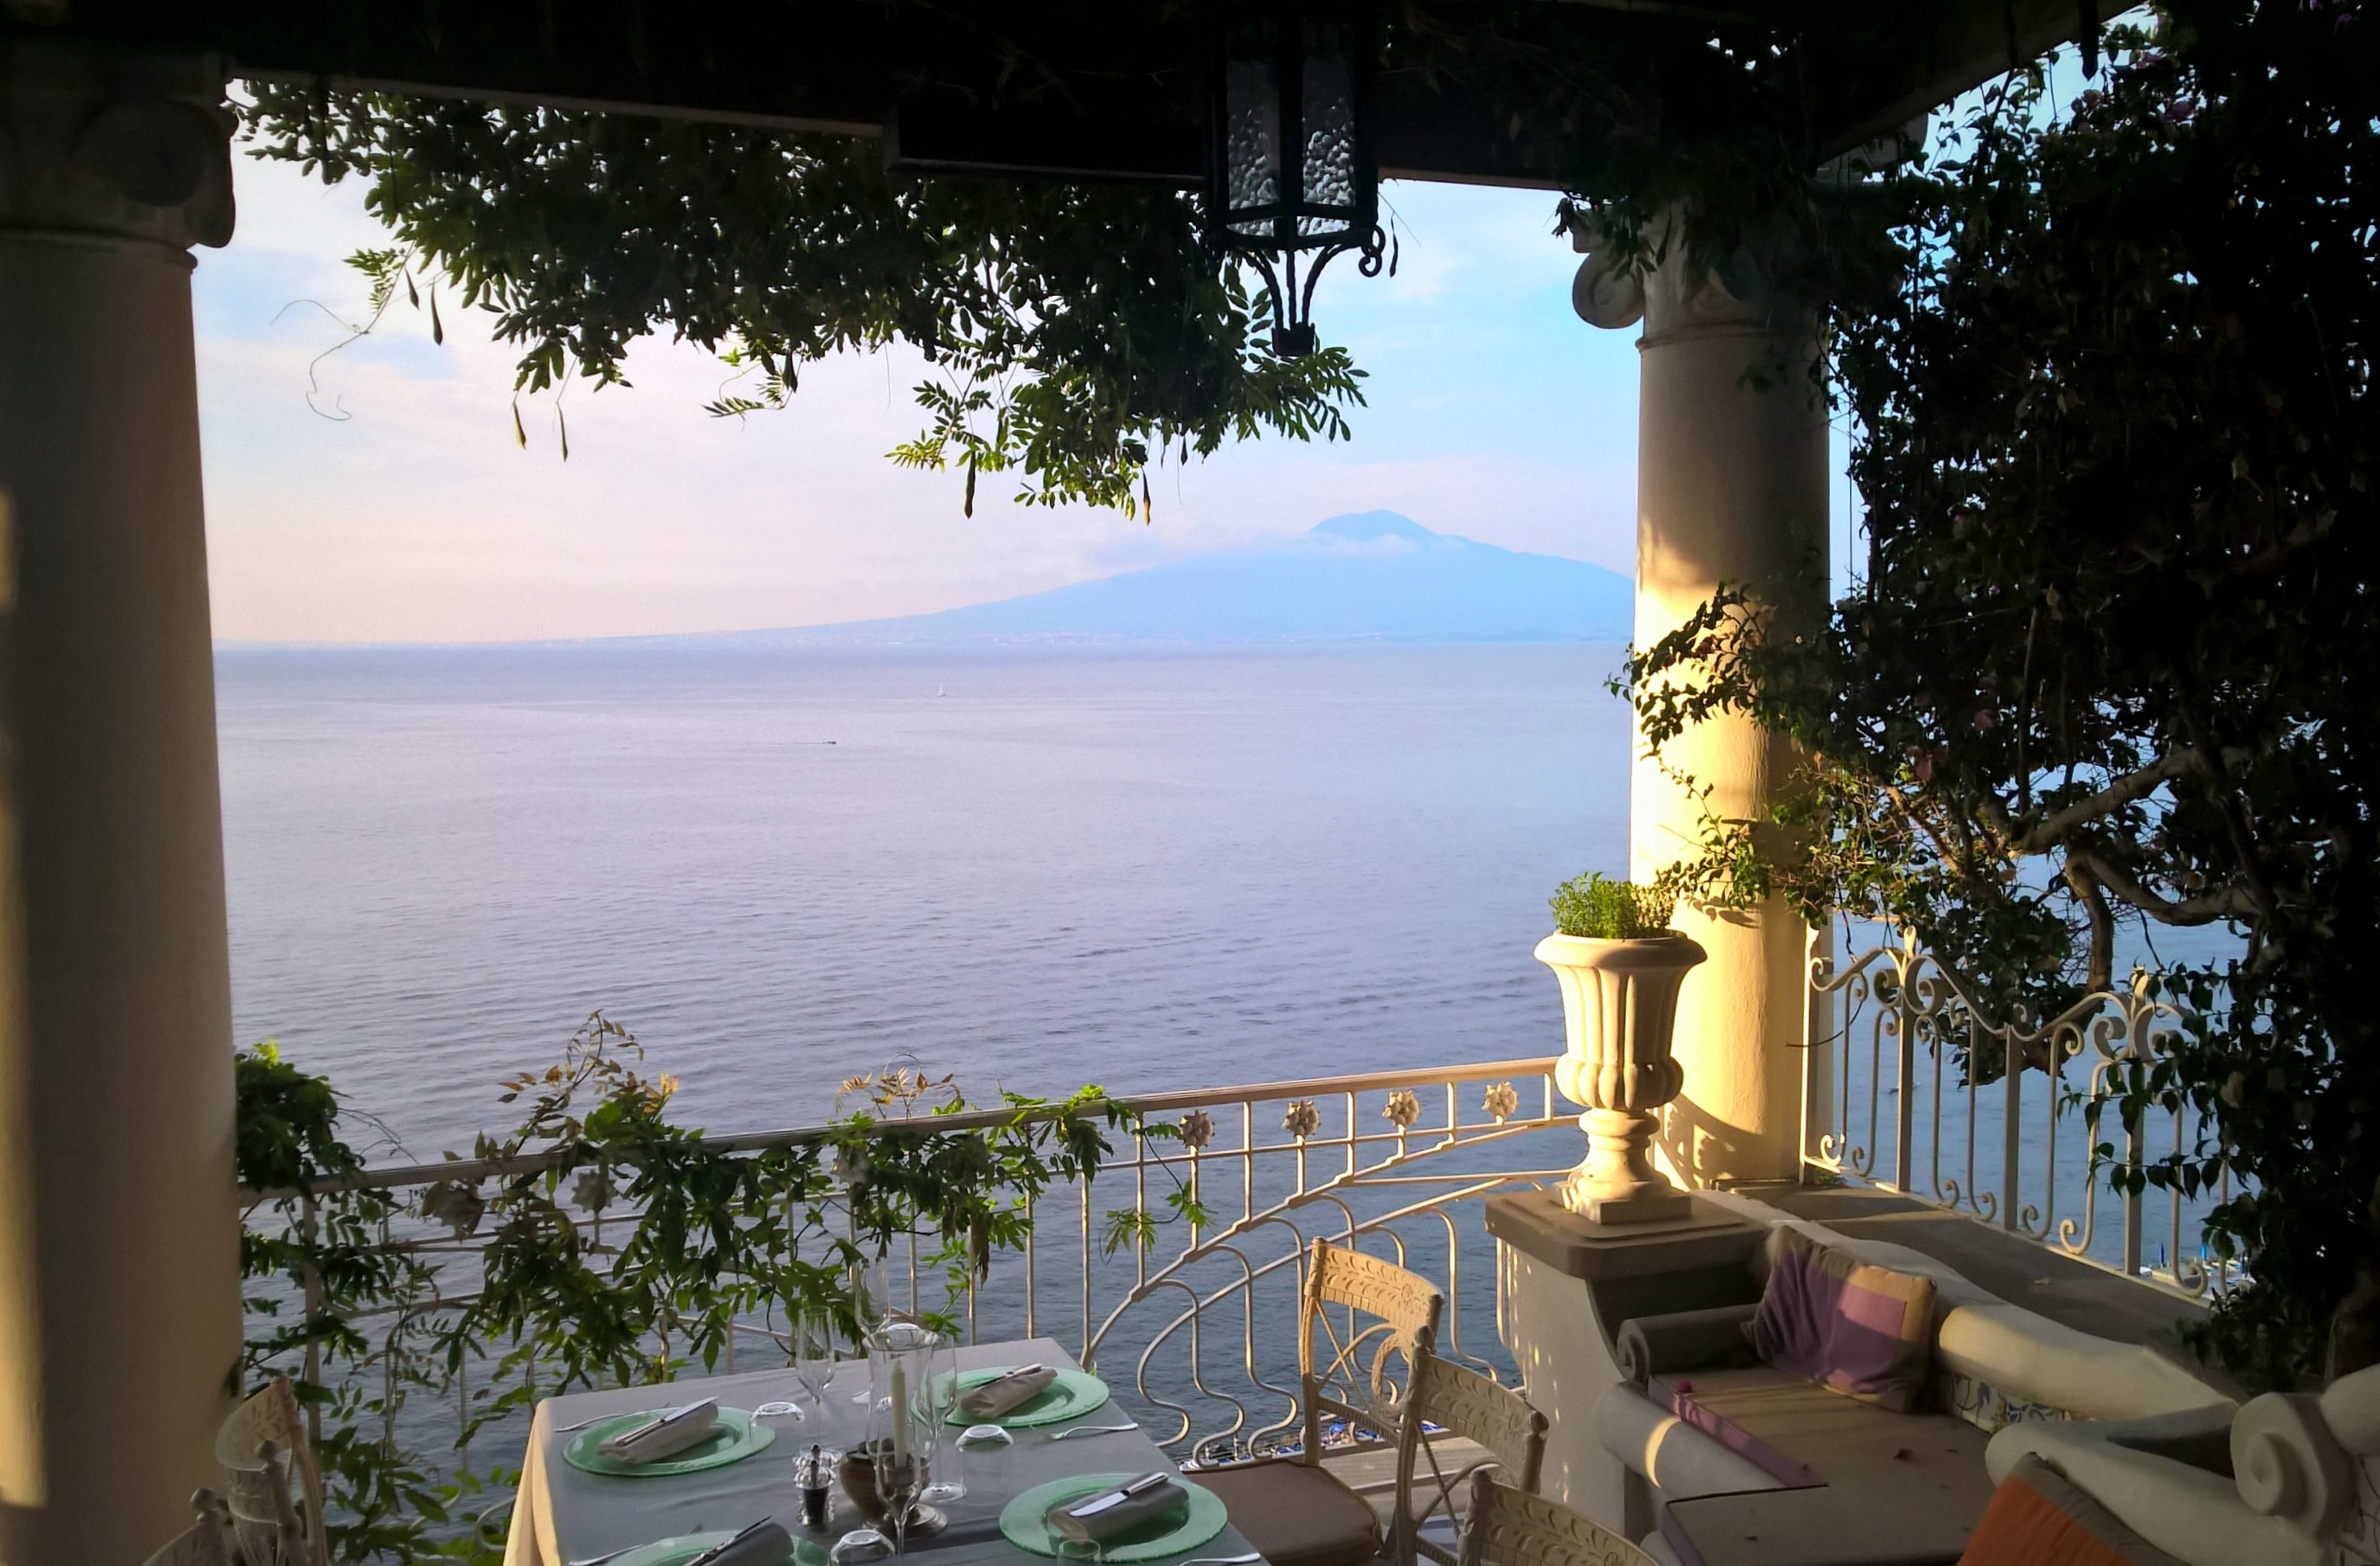 Terrace view of the bay of Naples and Vesuvius.